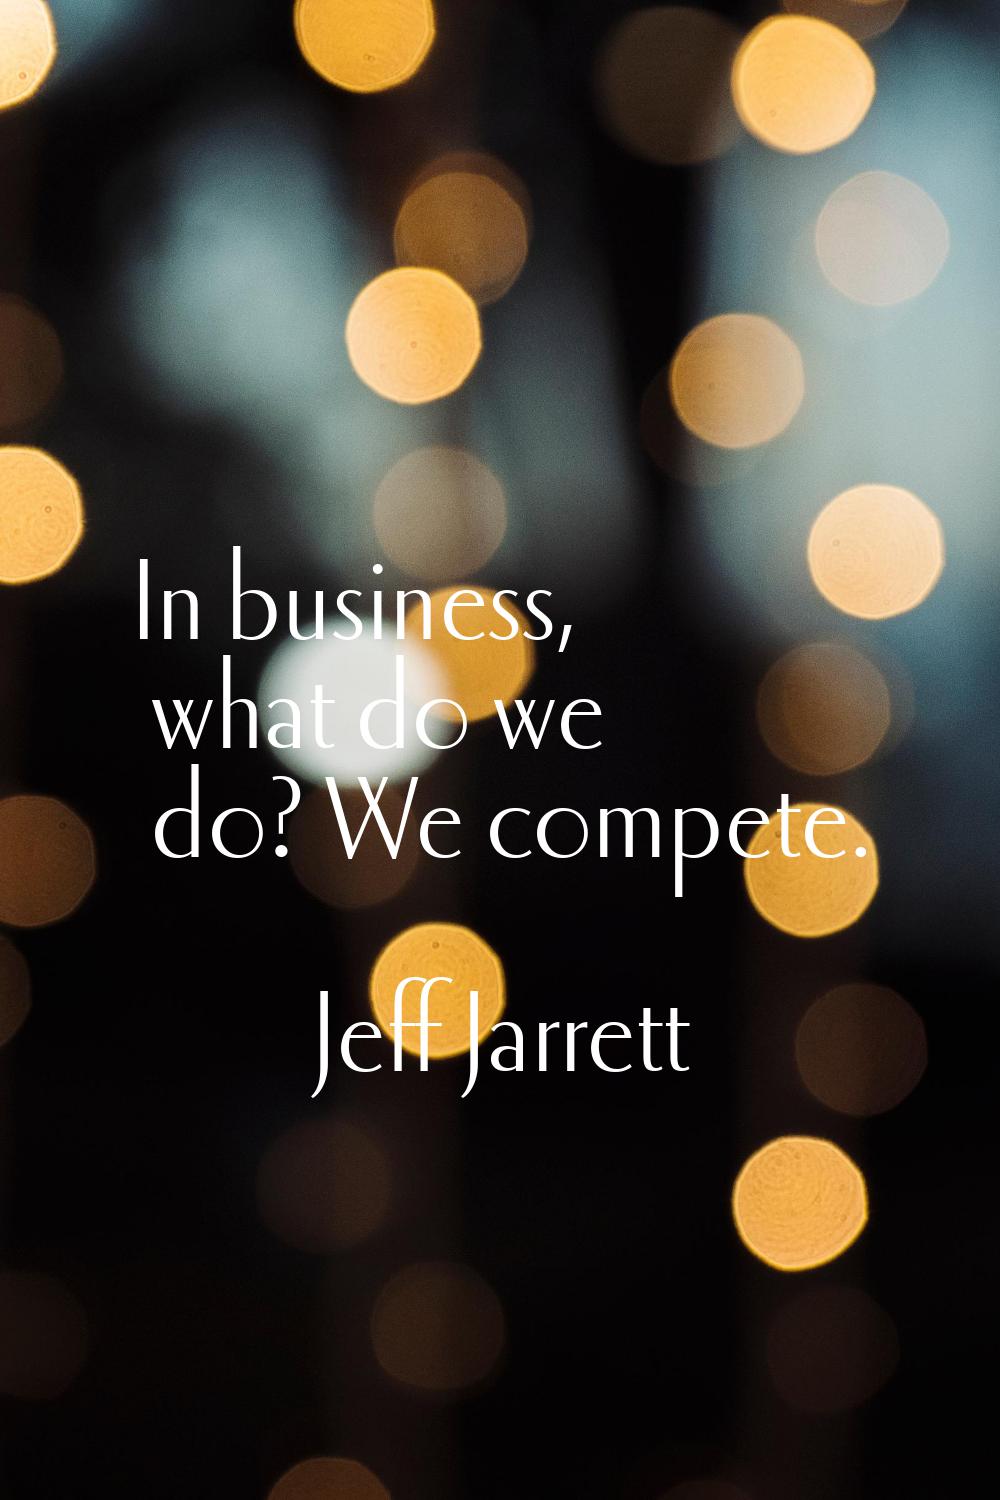 In business, what do we do? We compete.